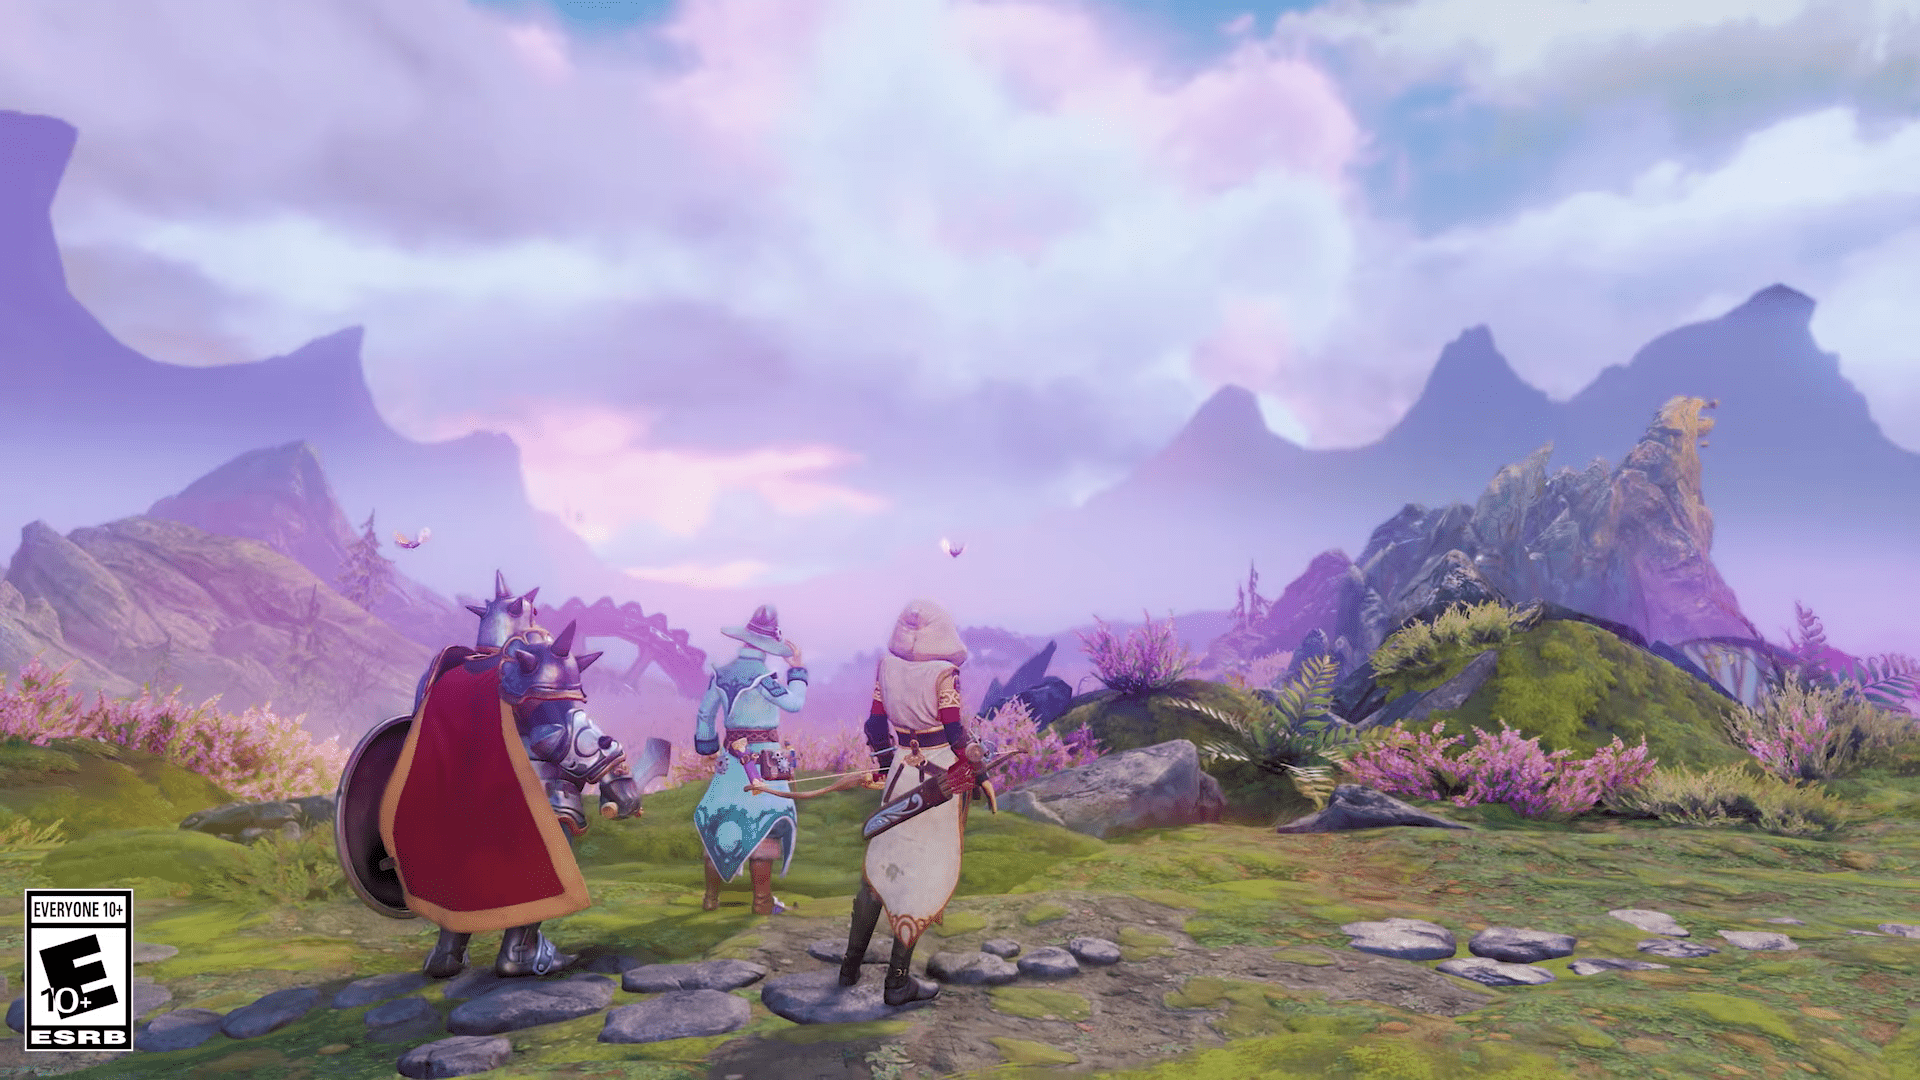 The Unique Platformer Trine 4: The Nightmare Prince Just Received A New Trailer That Shows The Three Heroes In Action